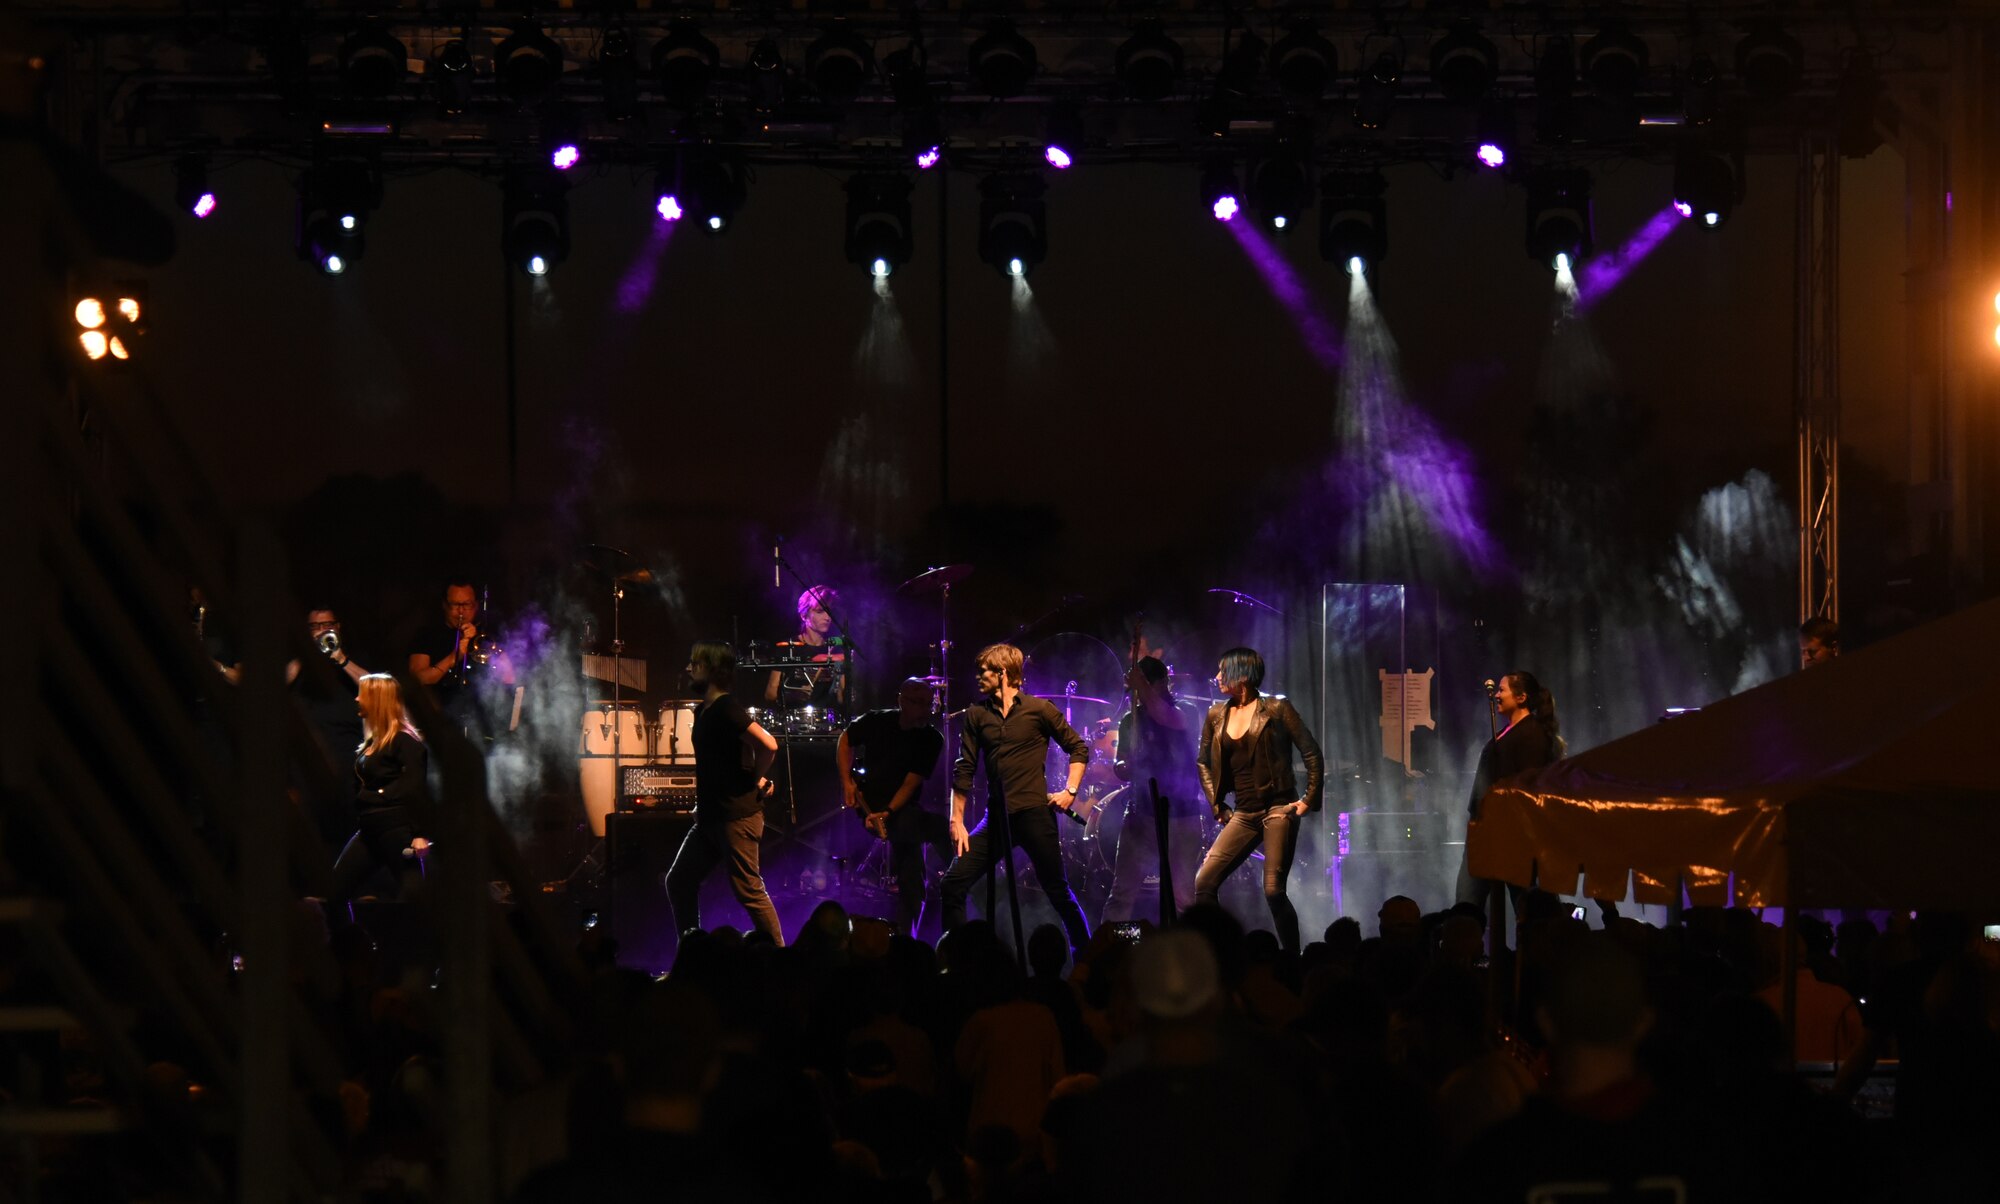 Gary Sinise and the Lt. Dan Band performs a song during a concert at Tyndall Air Force Base, Fla., March 4, 2018. During the concert, the band began playing as the sun set, and continued into the early evening. The Gary Sinise Foundation, the parent organization of the band states, “Whether boosting morale on military bases at home and abroad or raising awareness at benefit concerts across the country, the band entertains, educates, inspires and builds communities with its explosive live show everywhere it goes.” (U.S. Air Force photo by Airman 1st Class Solomon Cook/Released)